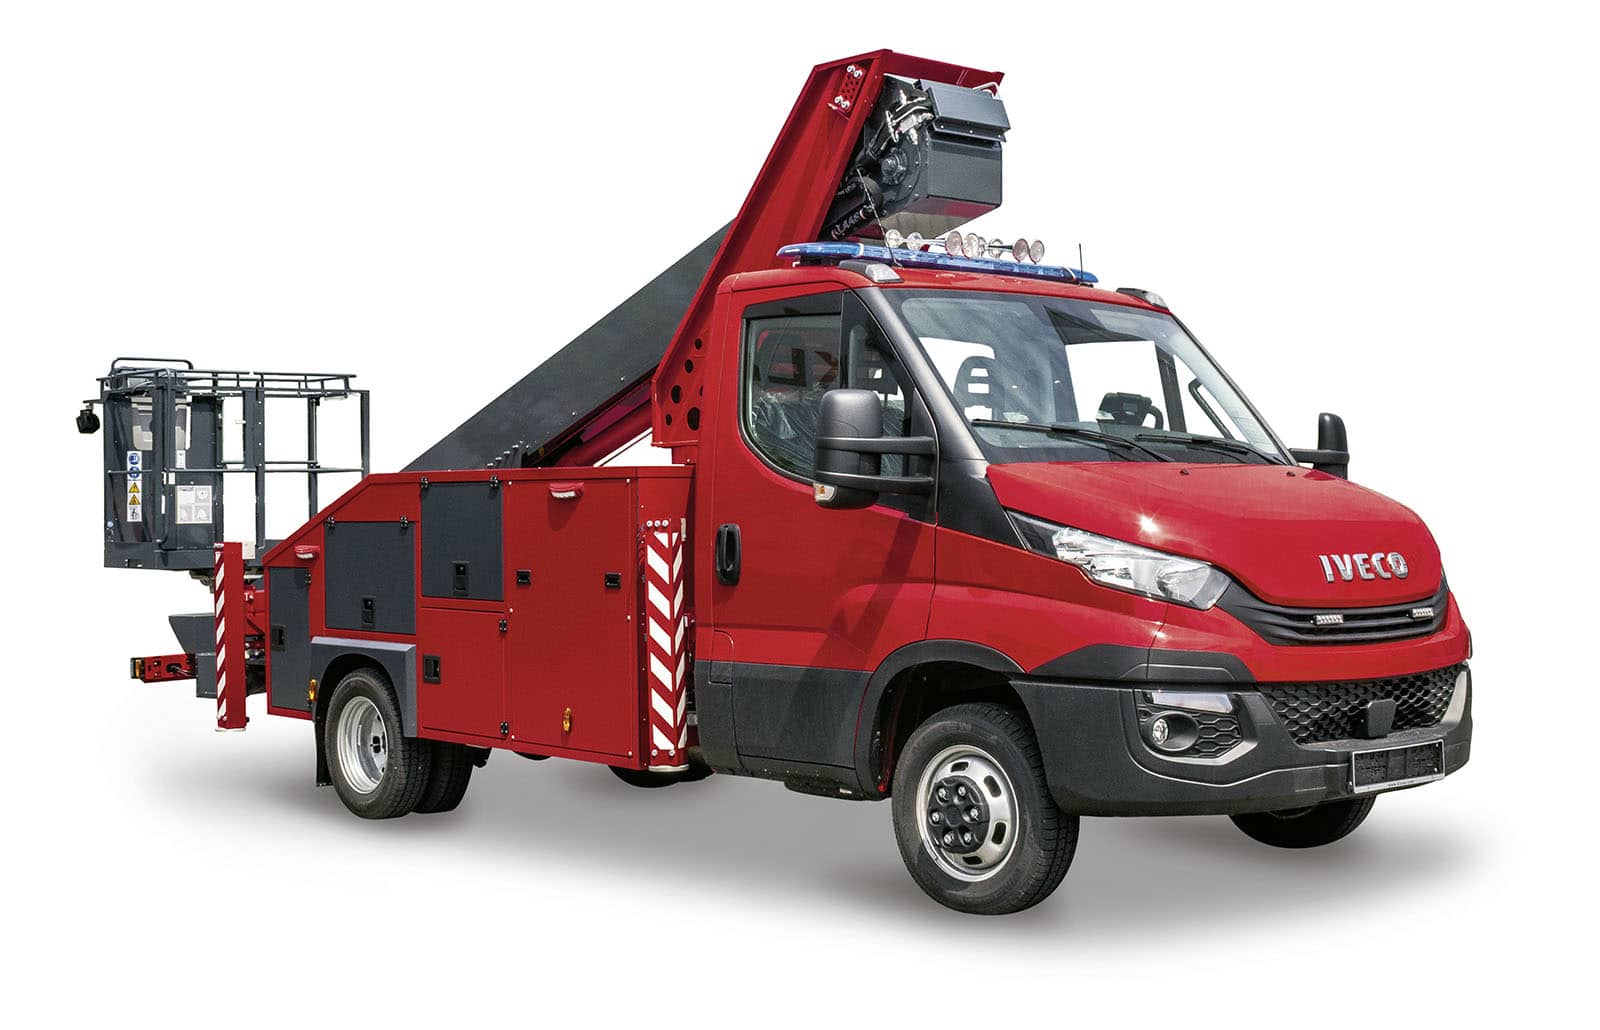 Theo20 FW - Klaas - trailer cranes, mobile cranes, furniture lifts,  construction lift, firefighting technology, elevating work platforms